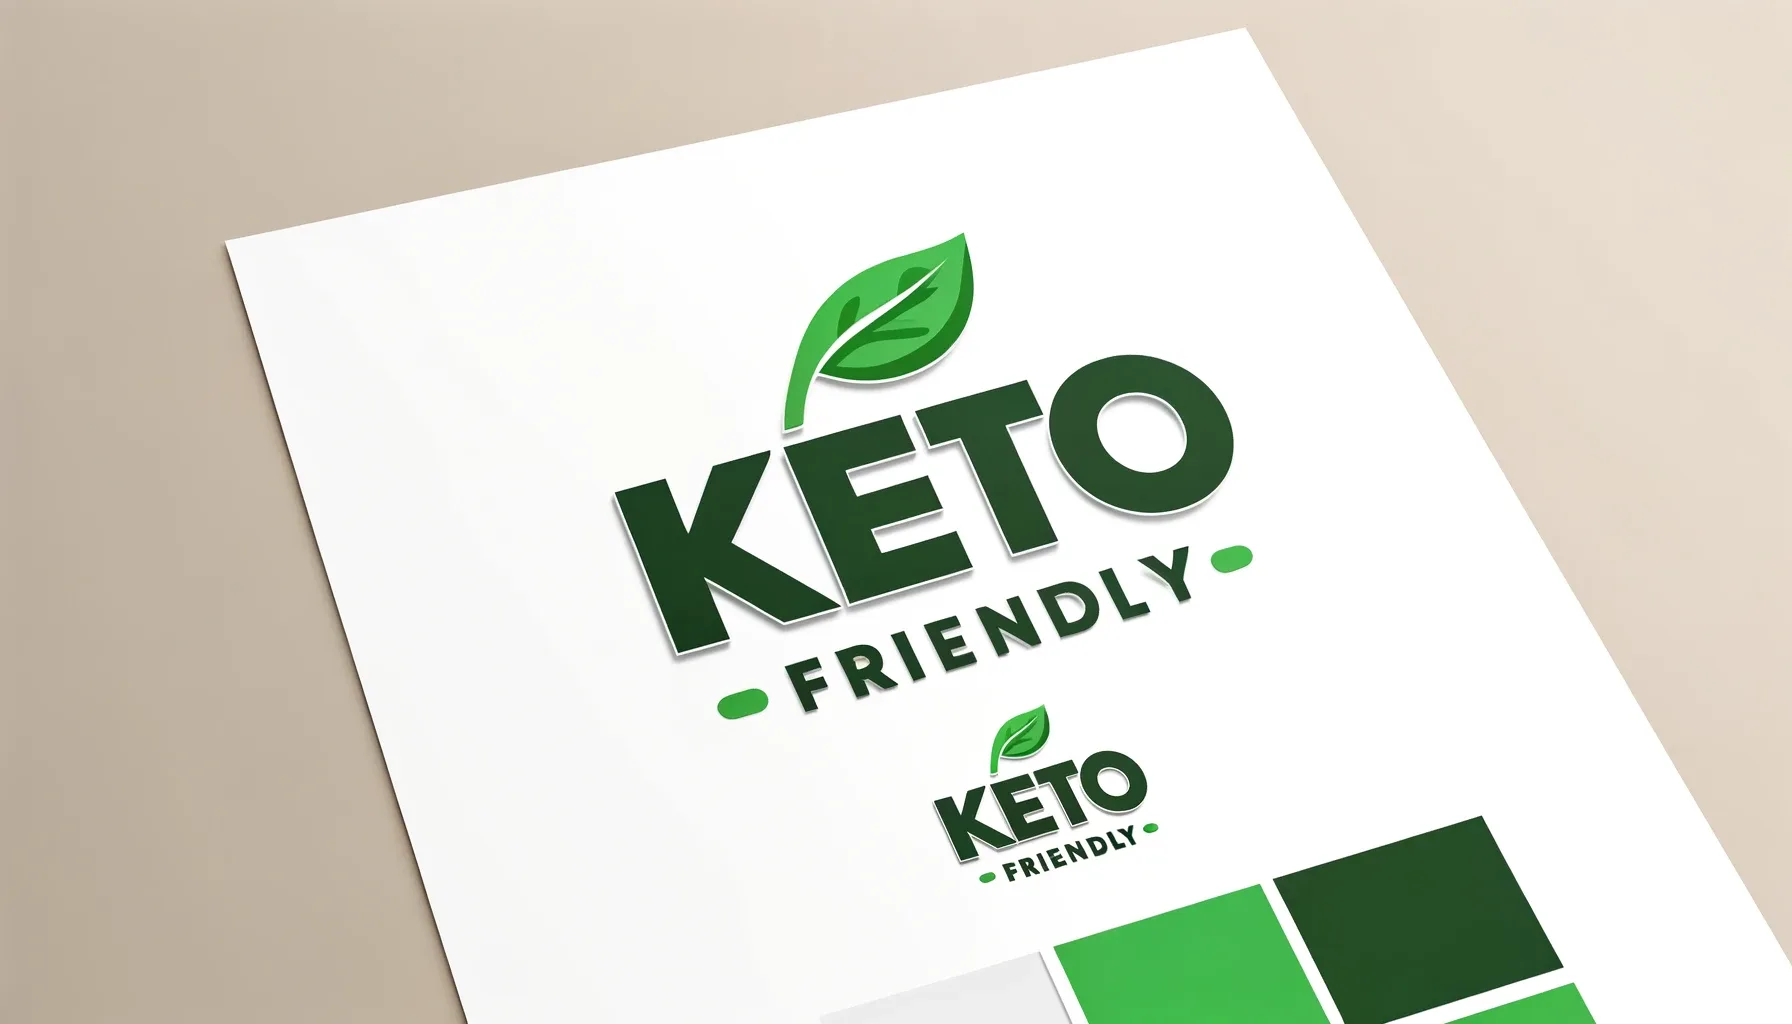 An image of a label that says KETO FRIENDLY